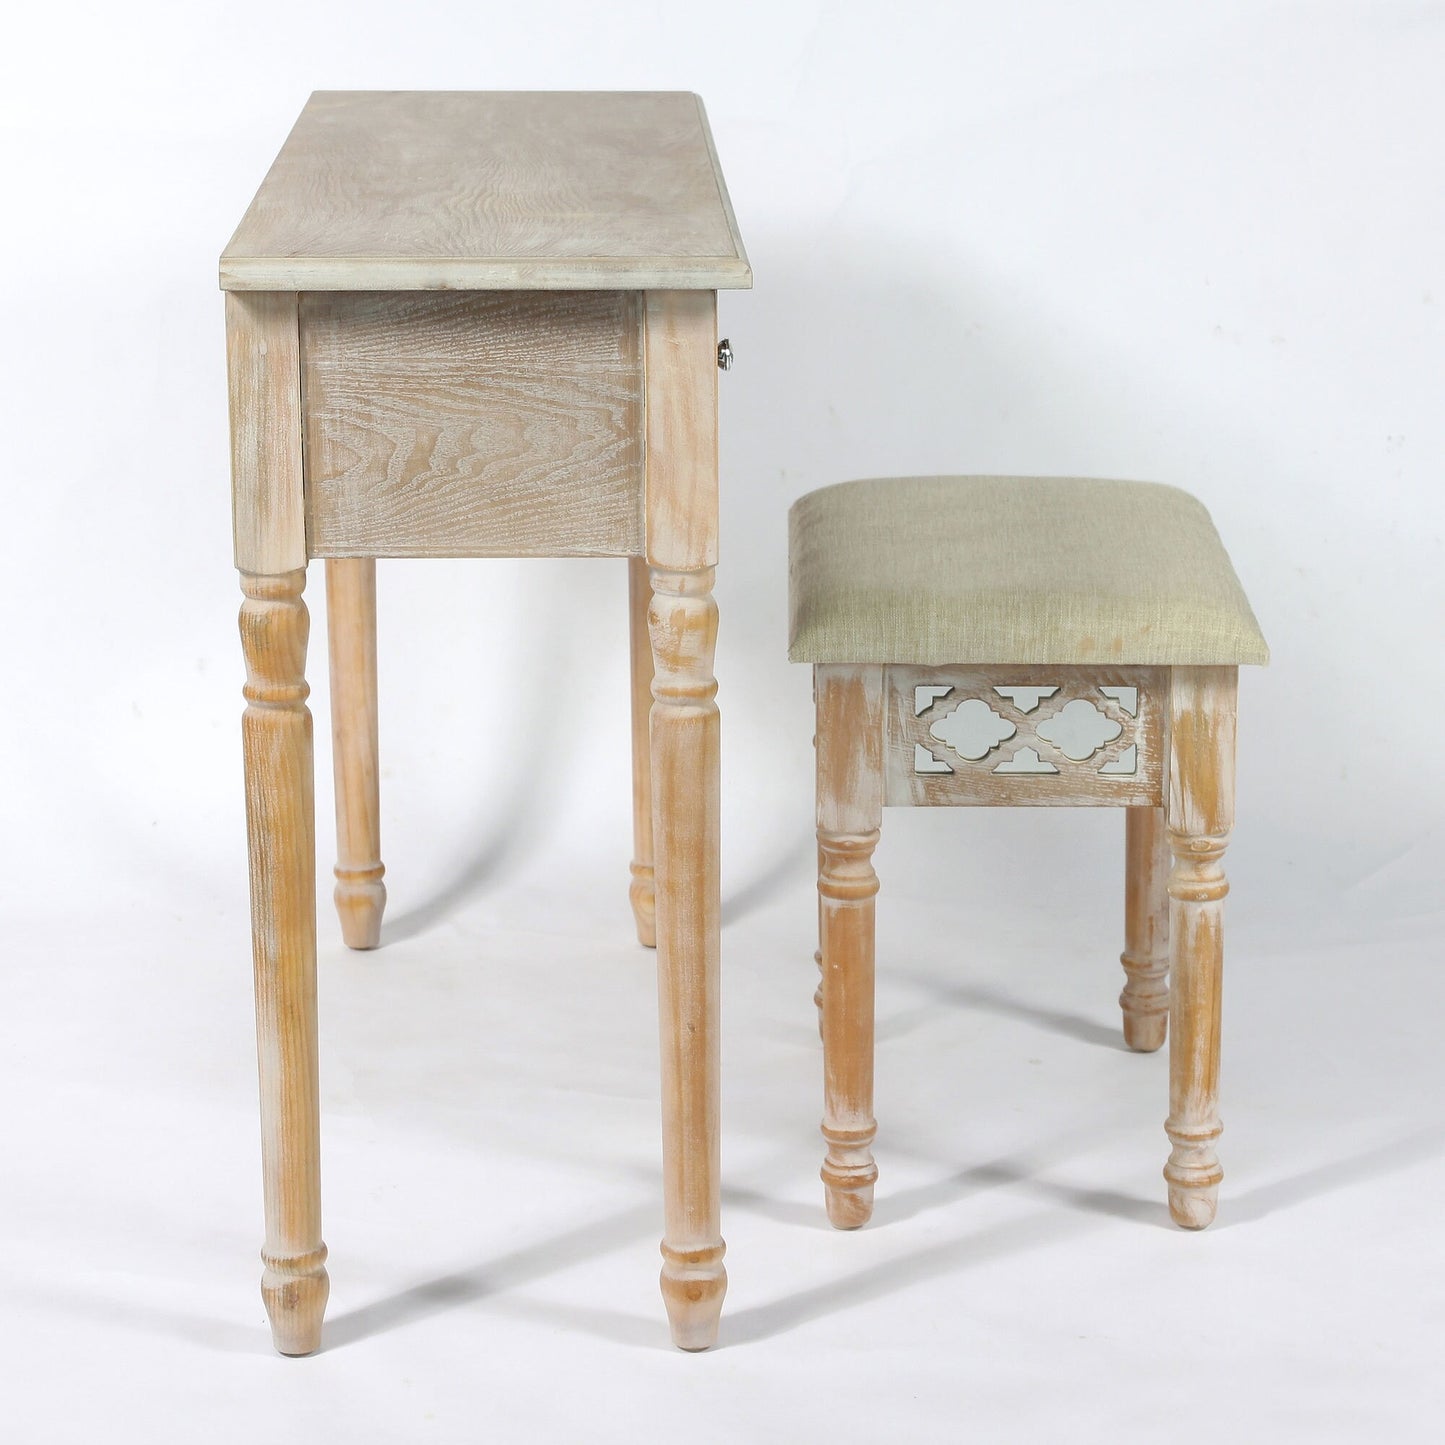 Washed wood effect dressing table and stool